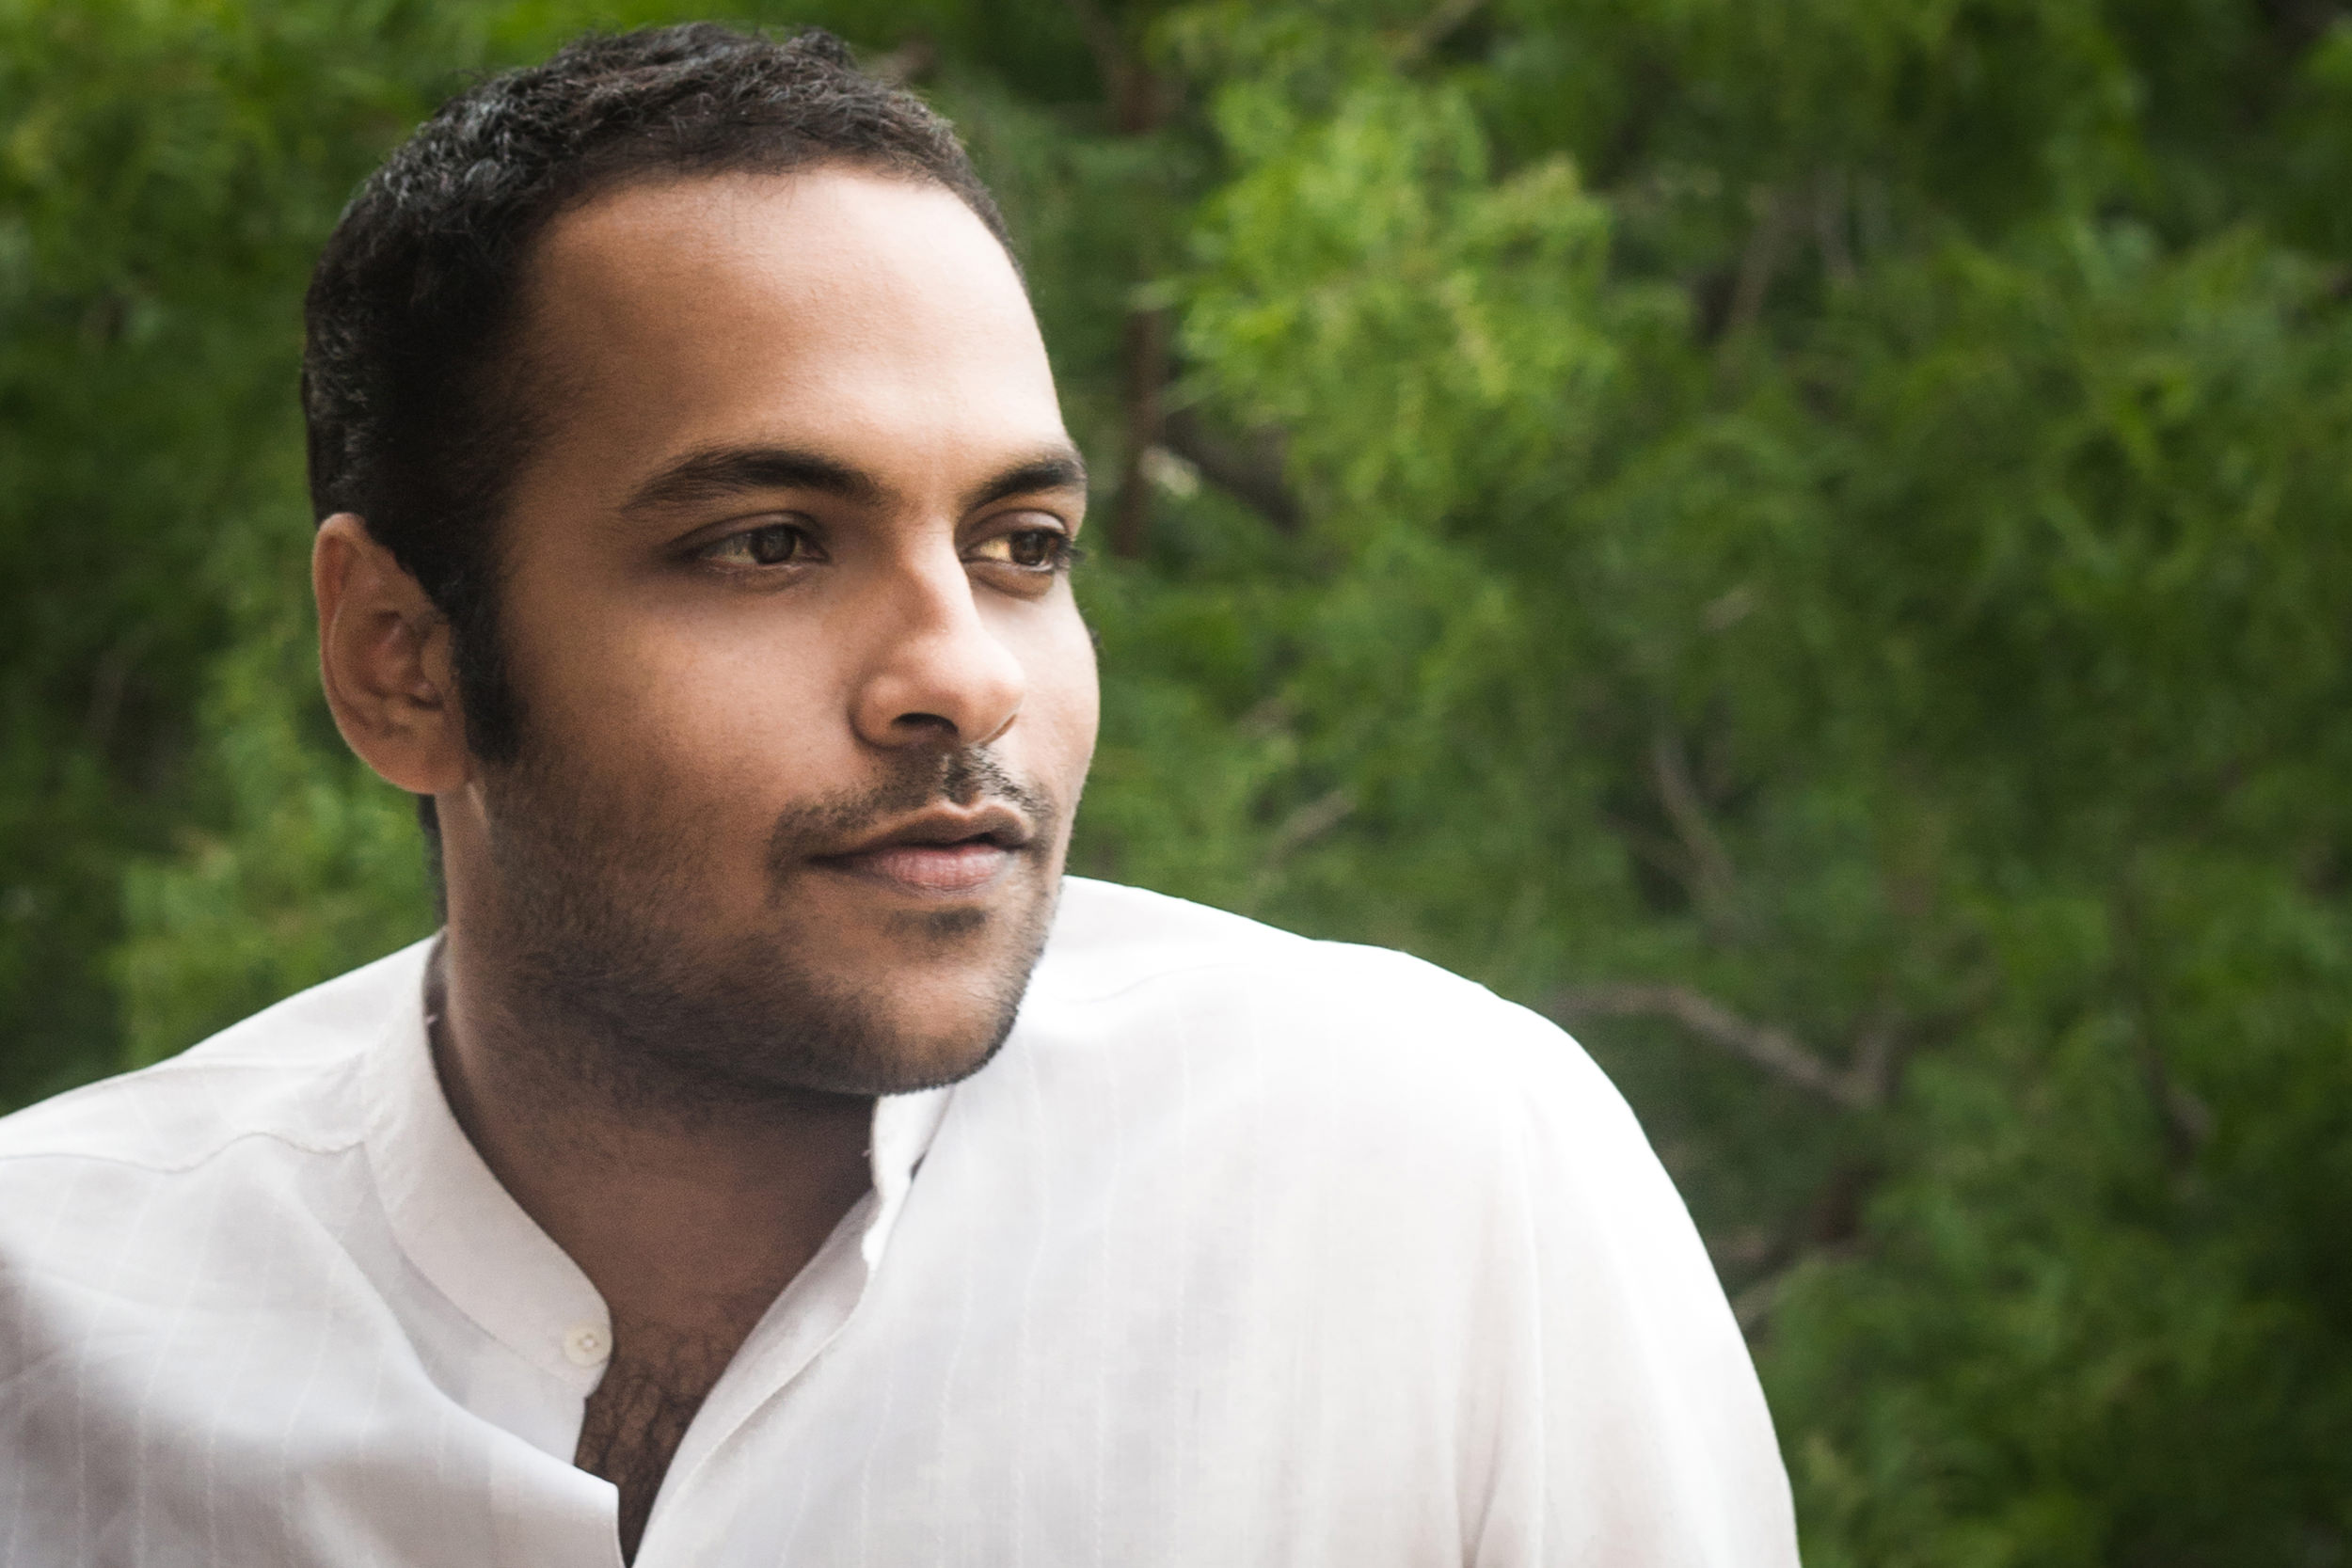 Shah Numair Ahmed Abbasi, Mixed Media Artist and Mittal Institute Spring 2020 Visiting Artist Fellow